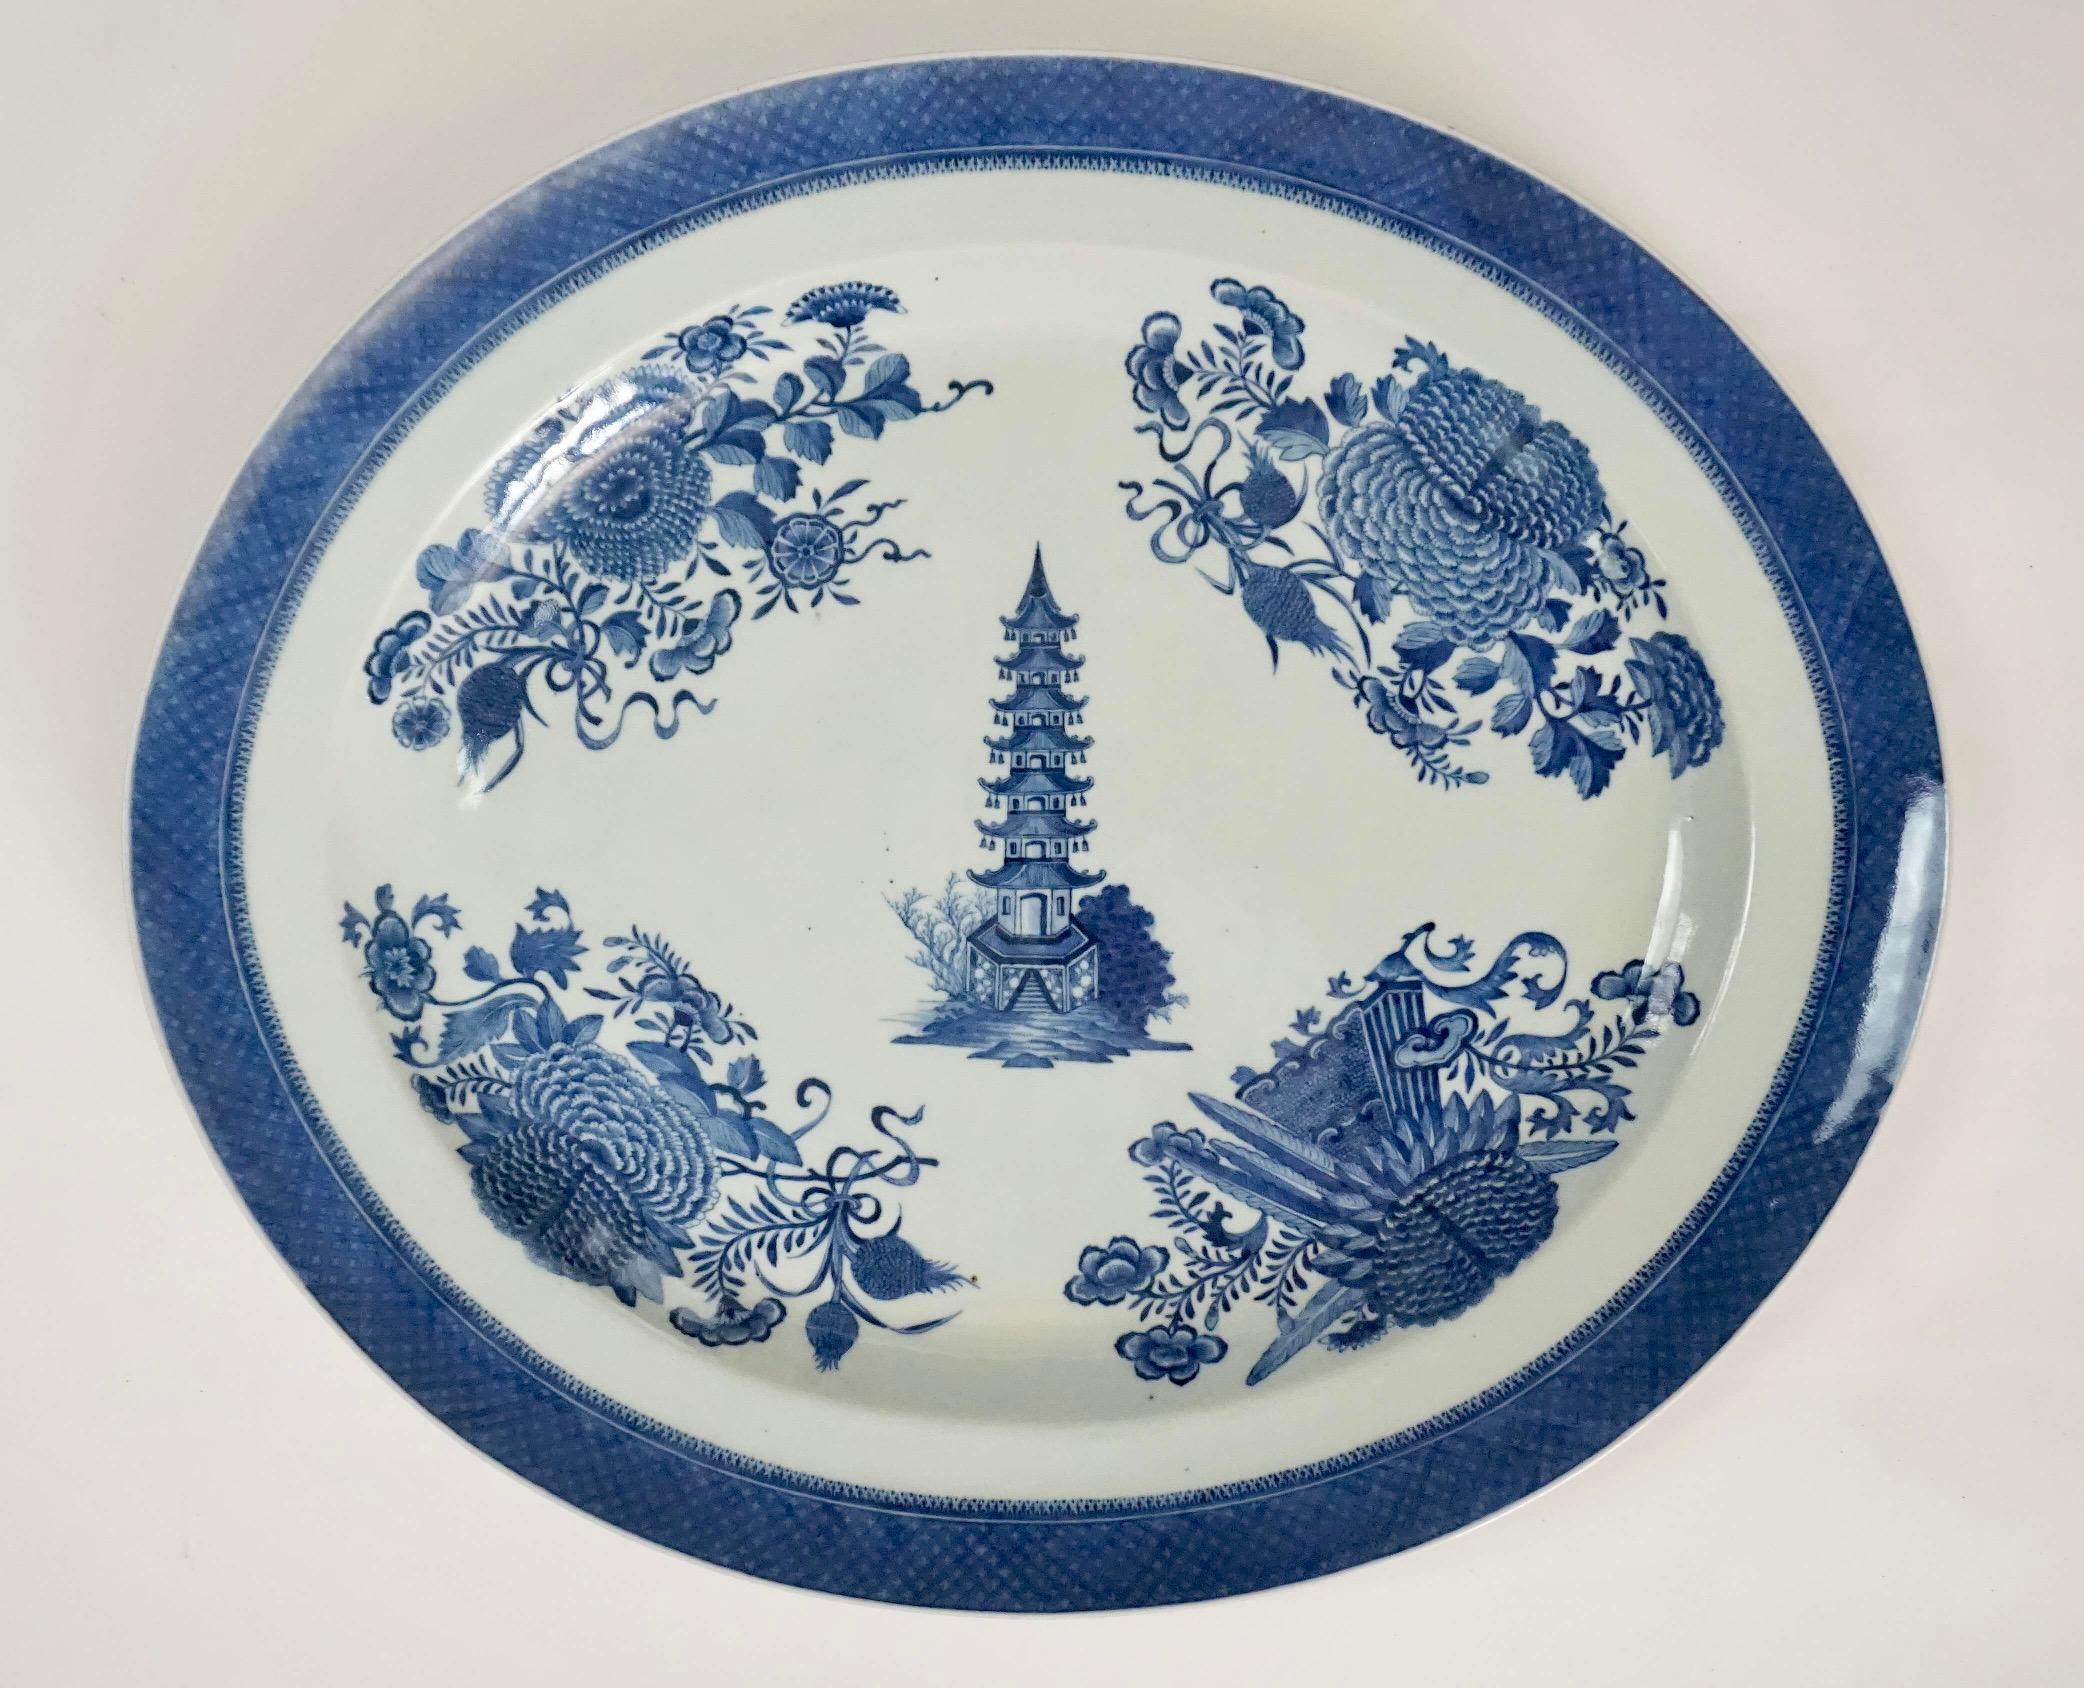 Chinese Export 'Blue Fitzhugh' Platters from the Cabot-Perkins Service, c. 1812 In Good Condition For Sale In Kinderhook, NY